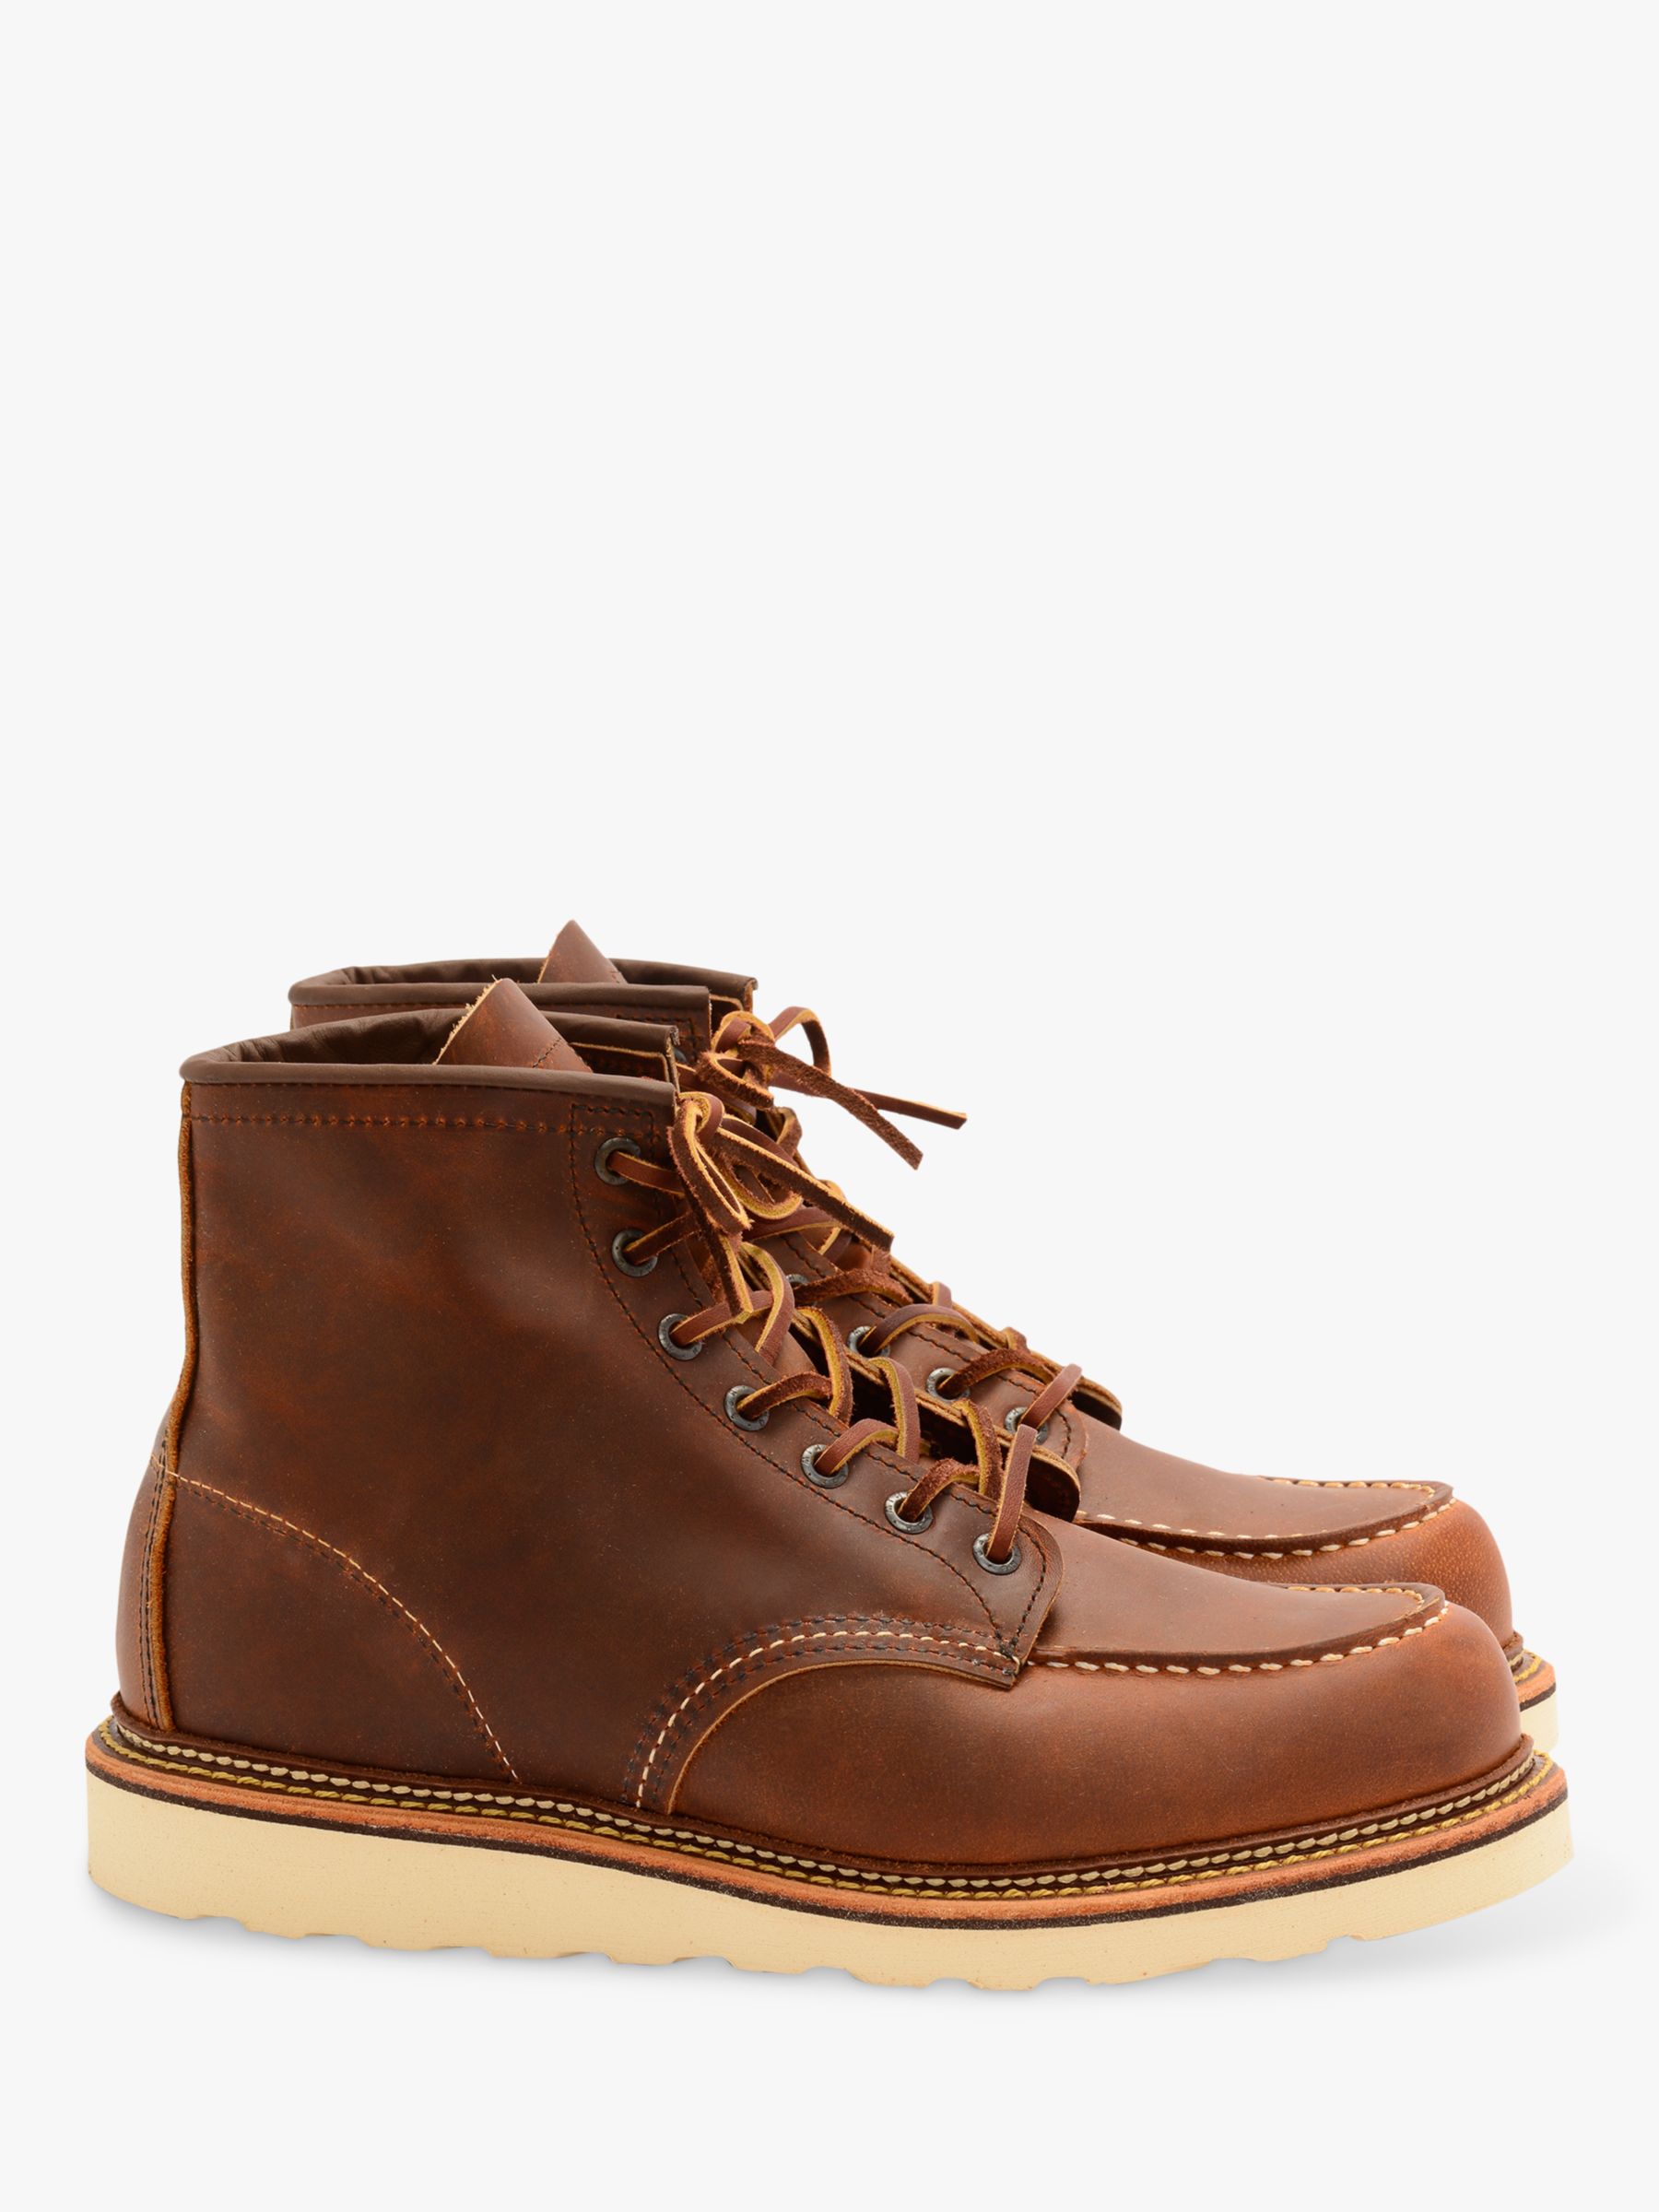 john lewis red wing boots